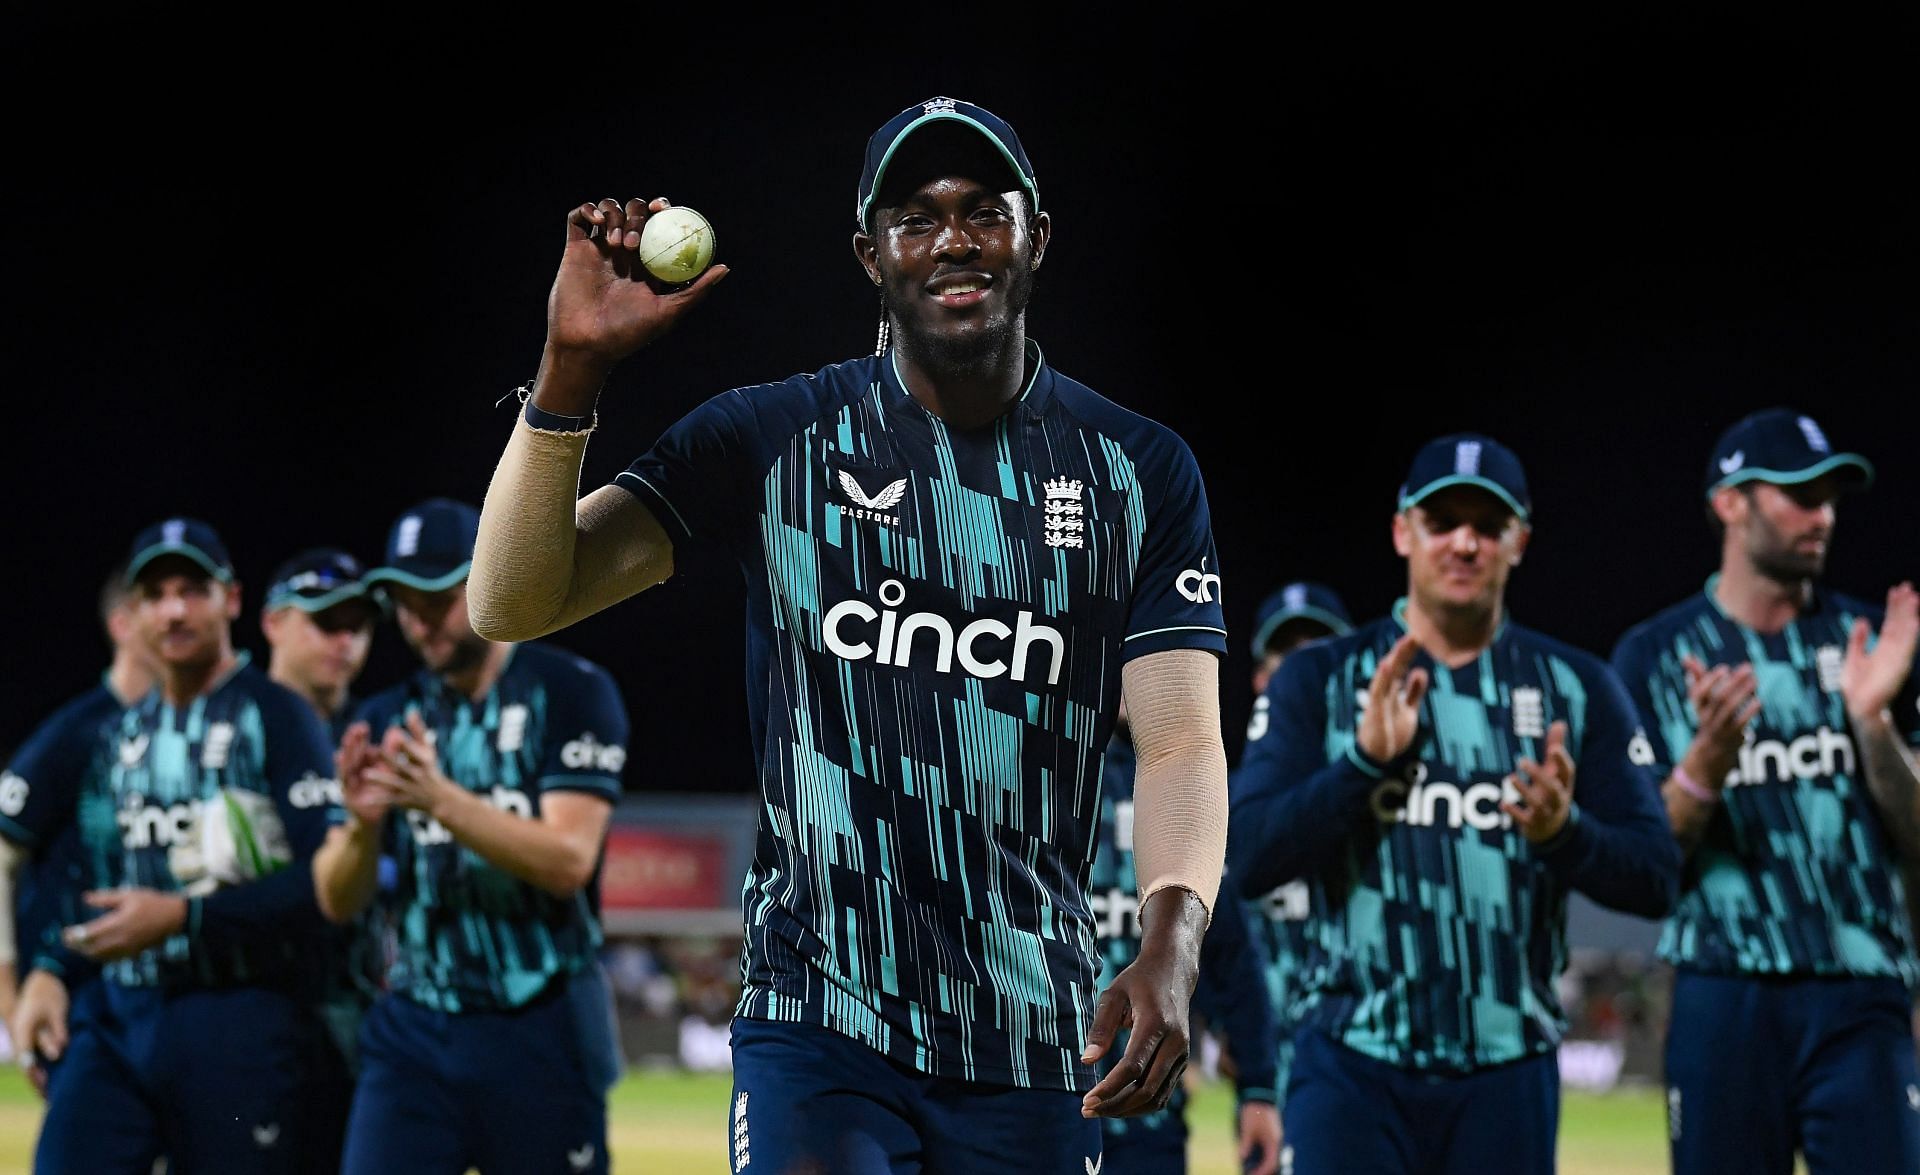 “The Mumbai guys are also getting happy” – Aakash Chopra feels Jofra Archer is back to his very best